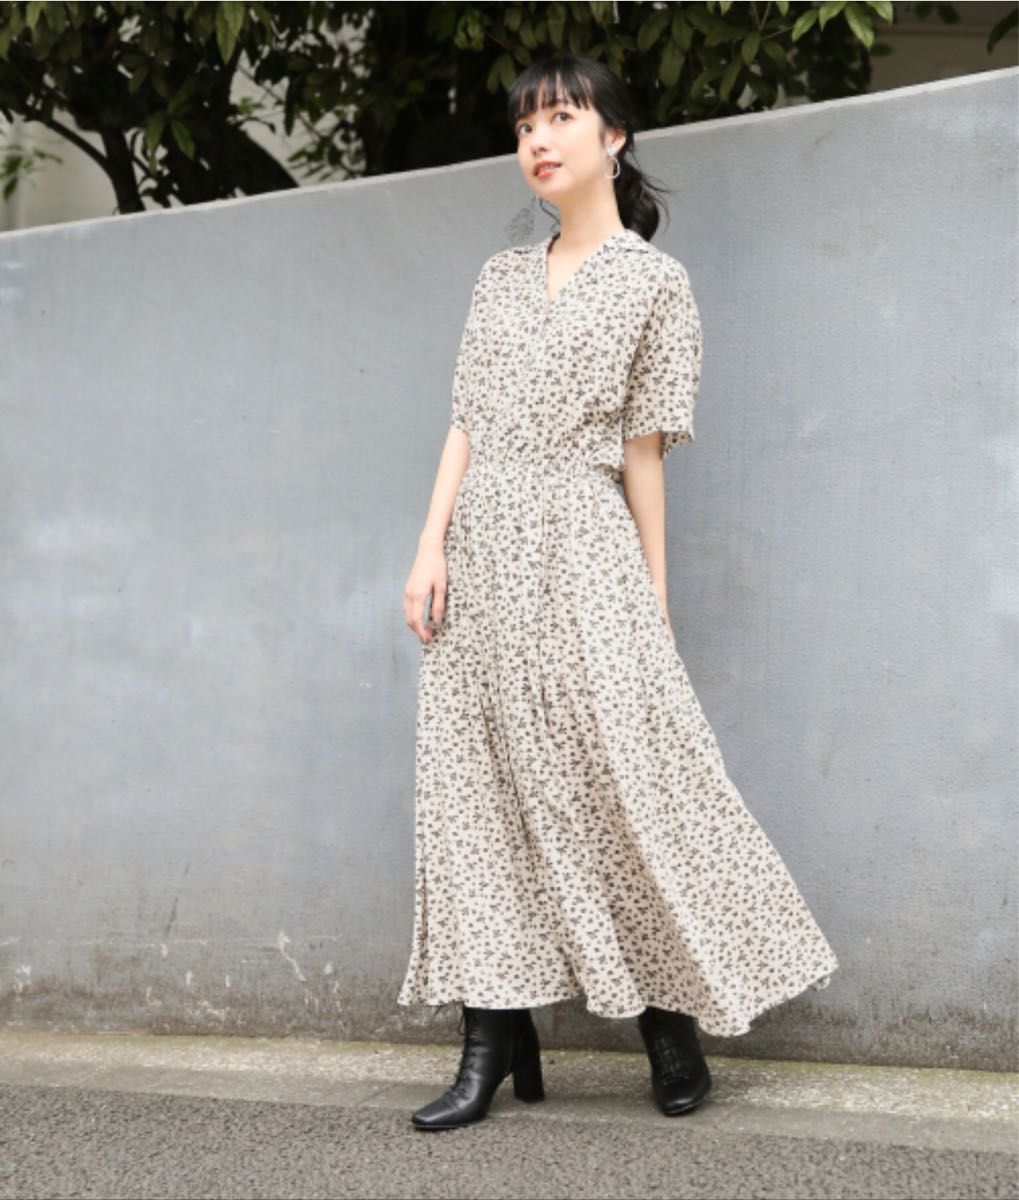 LOWRYS FARM 】小花柄シャツワンピース〈新品未使用タグ付き〉｜PayPayフリマ